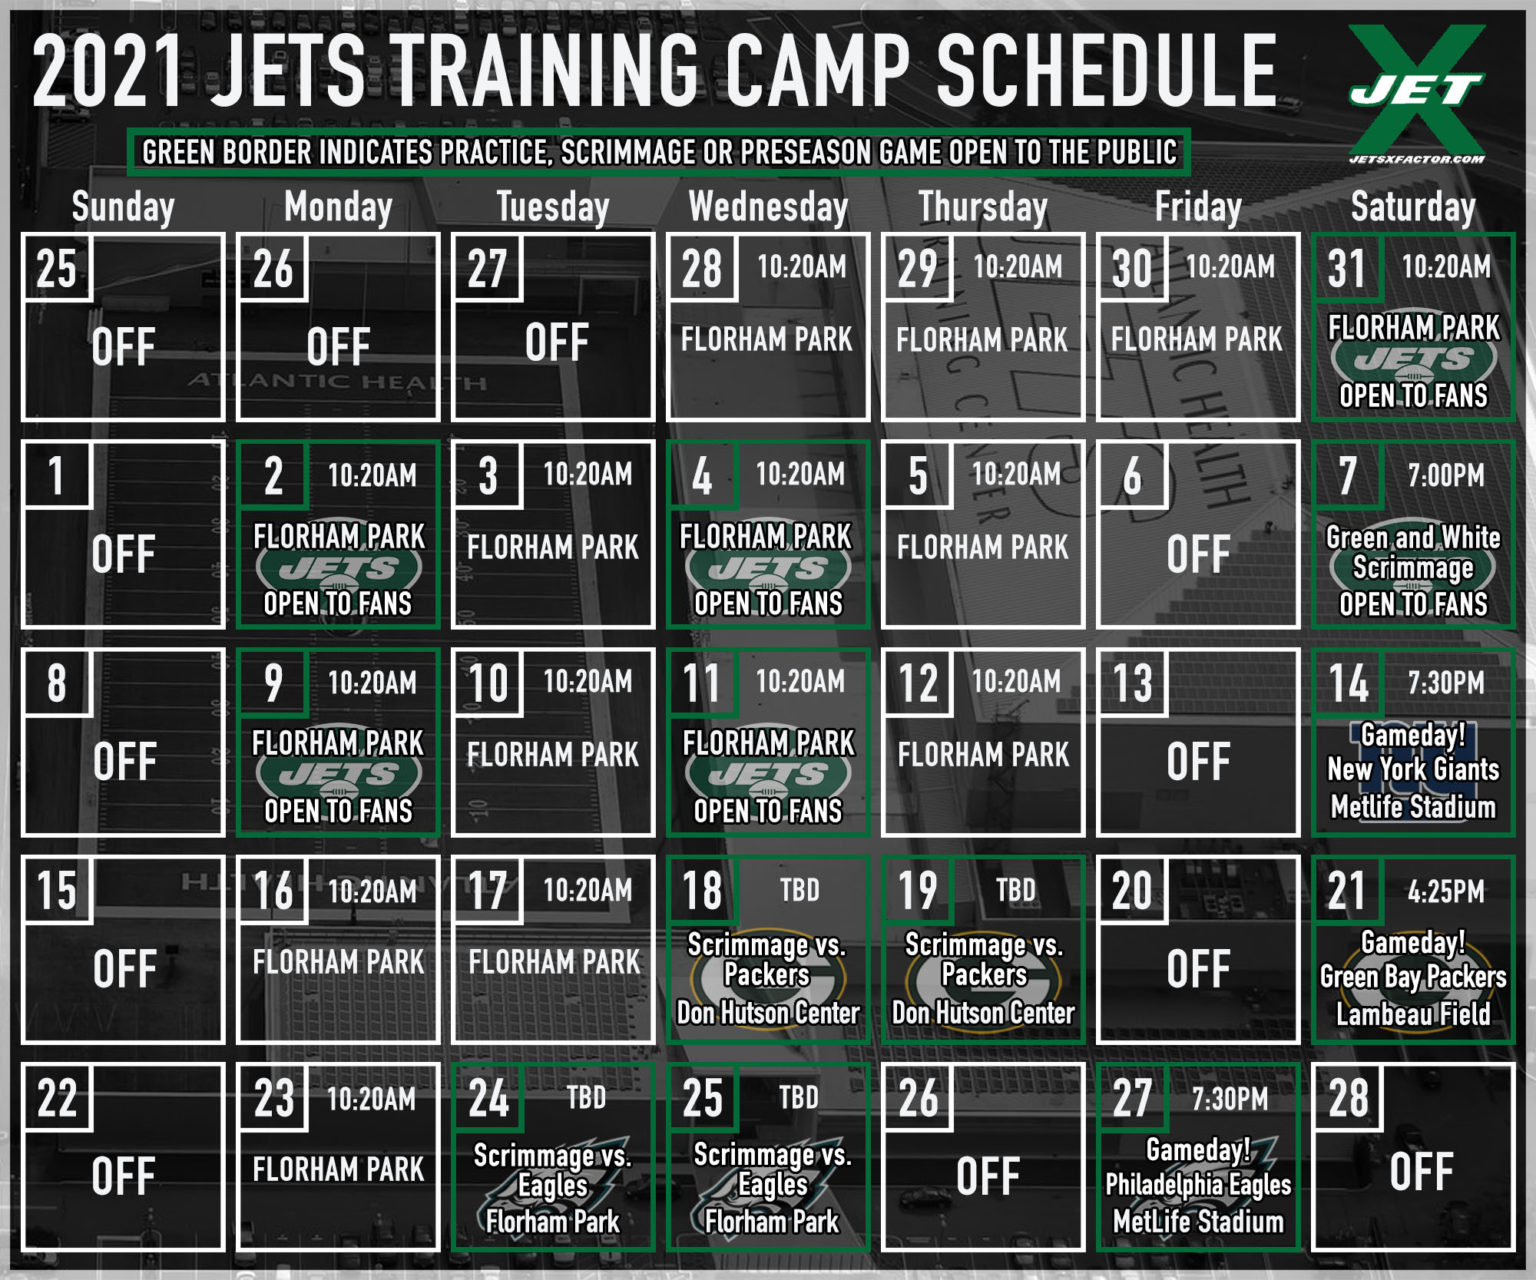 Important things to know as NY Jets open training camp